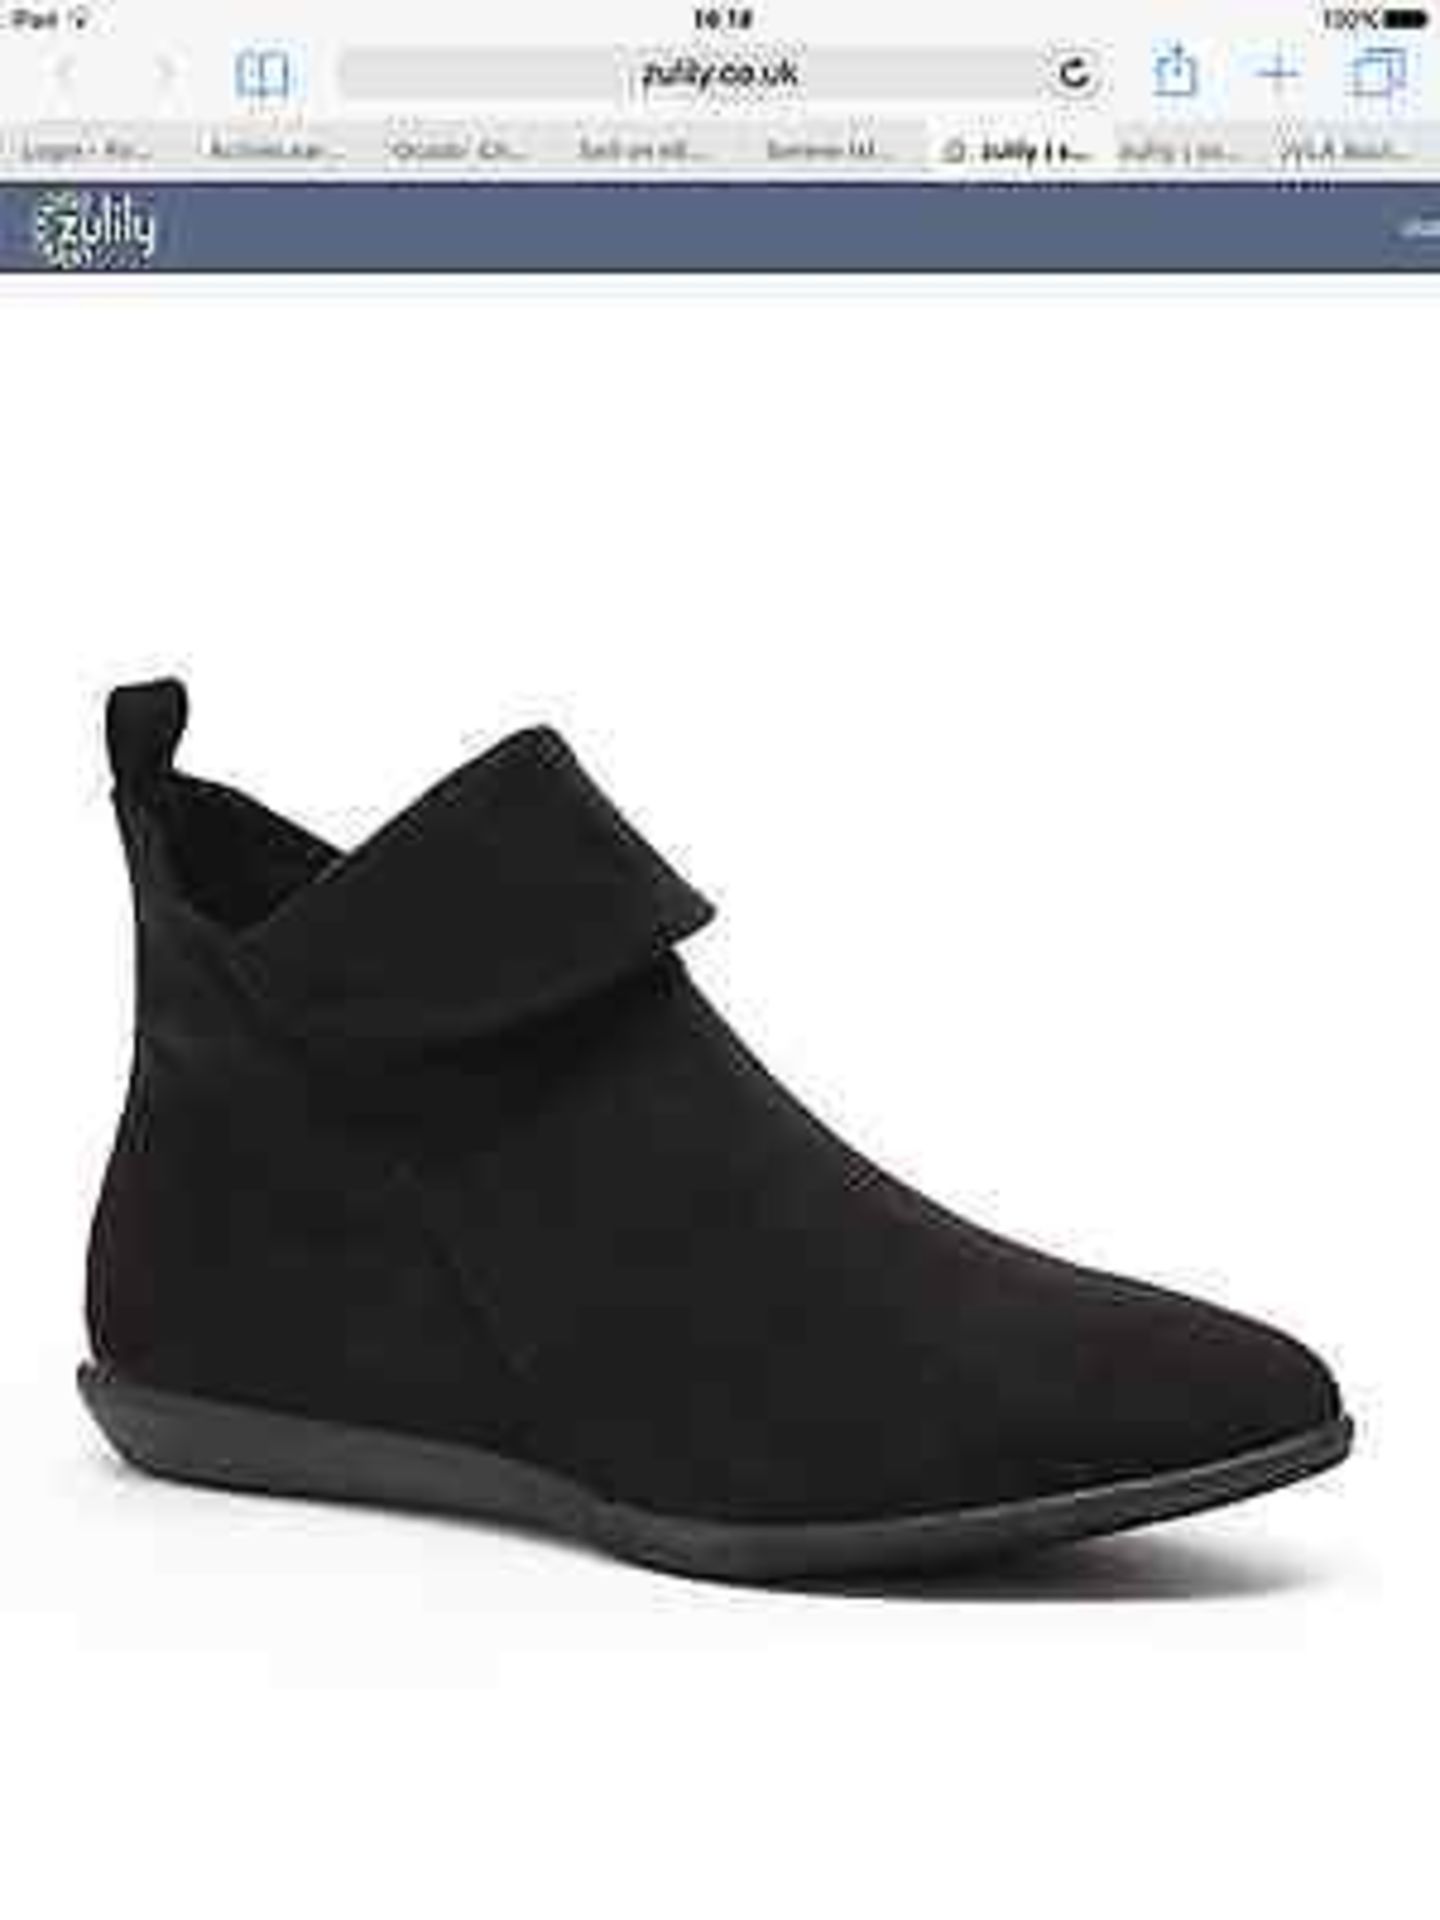 Serene Island Black Alannis Bootie, Size 6, RRP £95.99 (New with box)